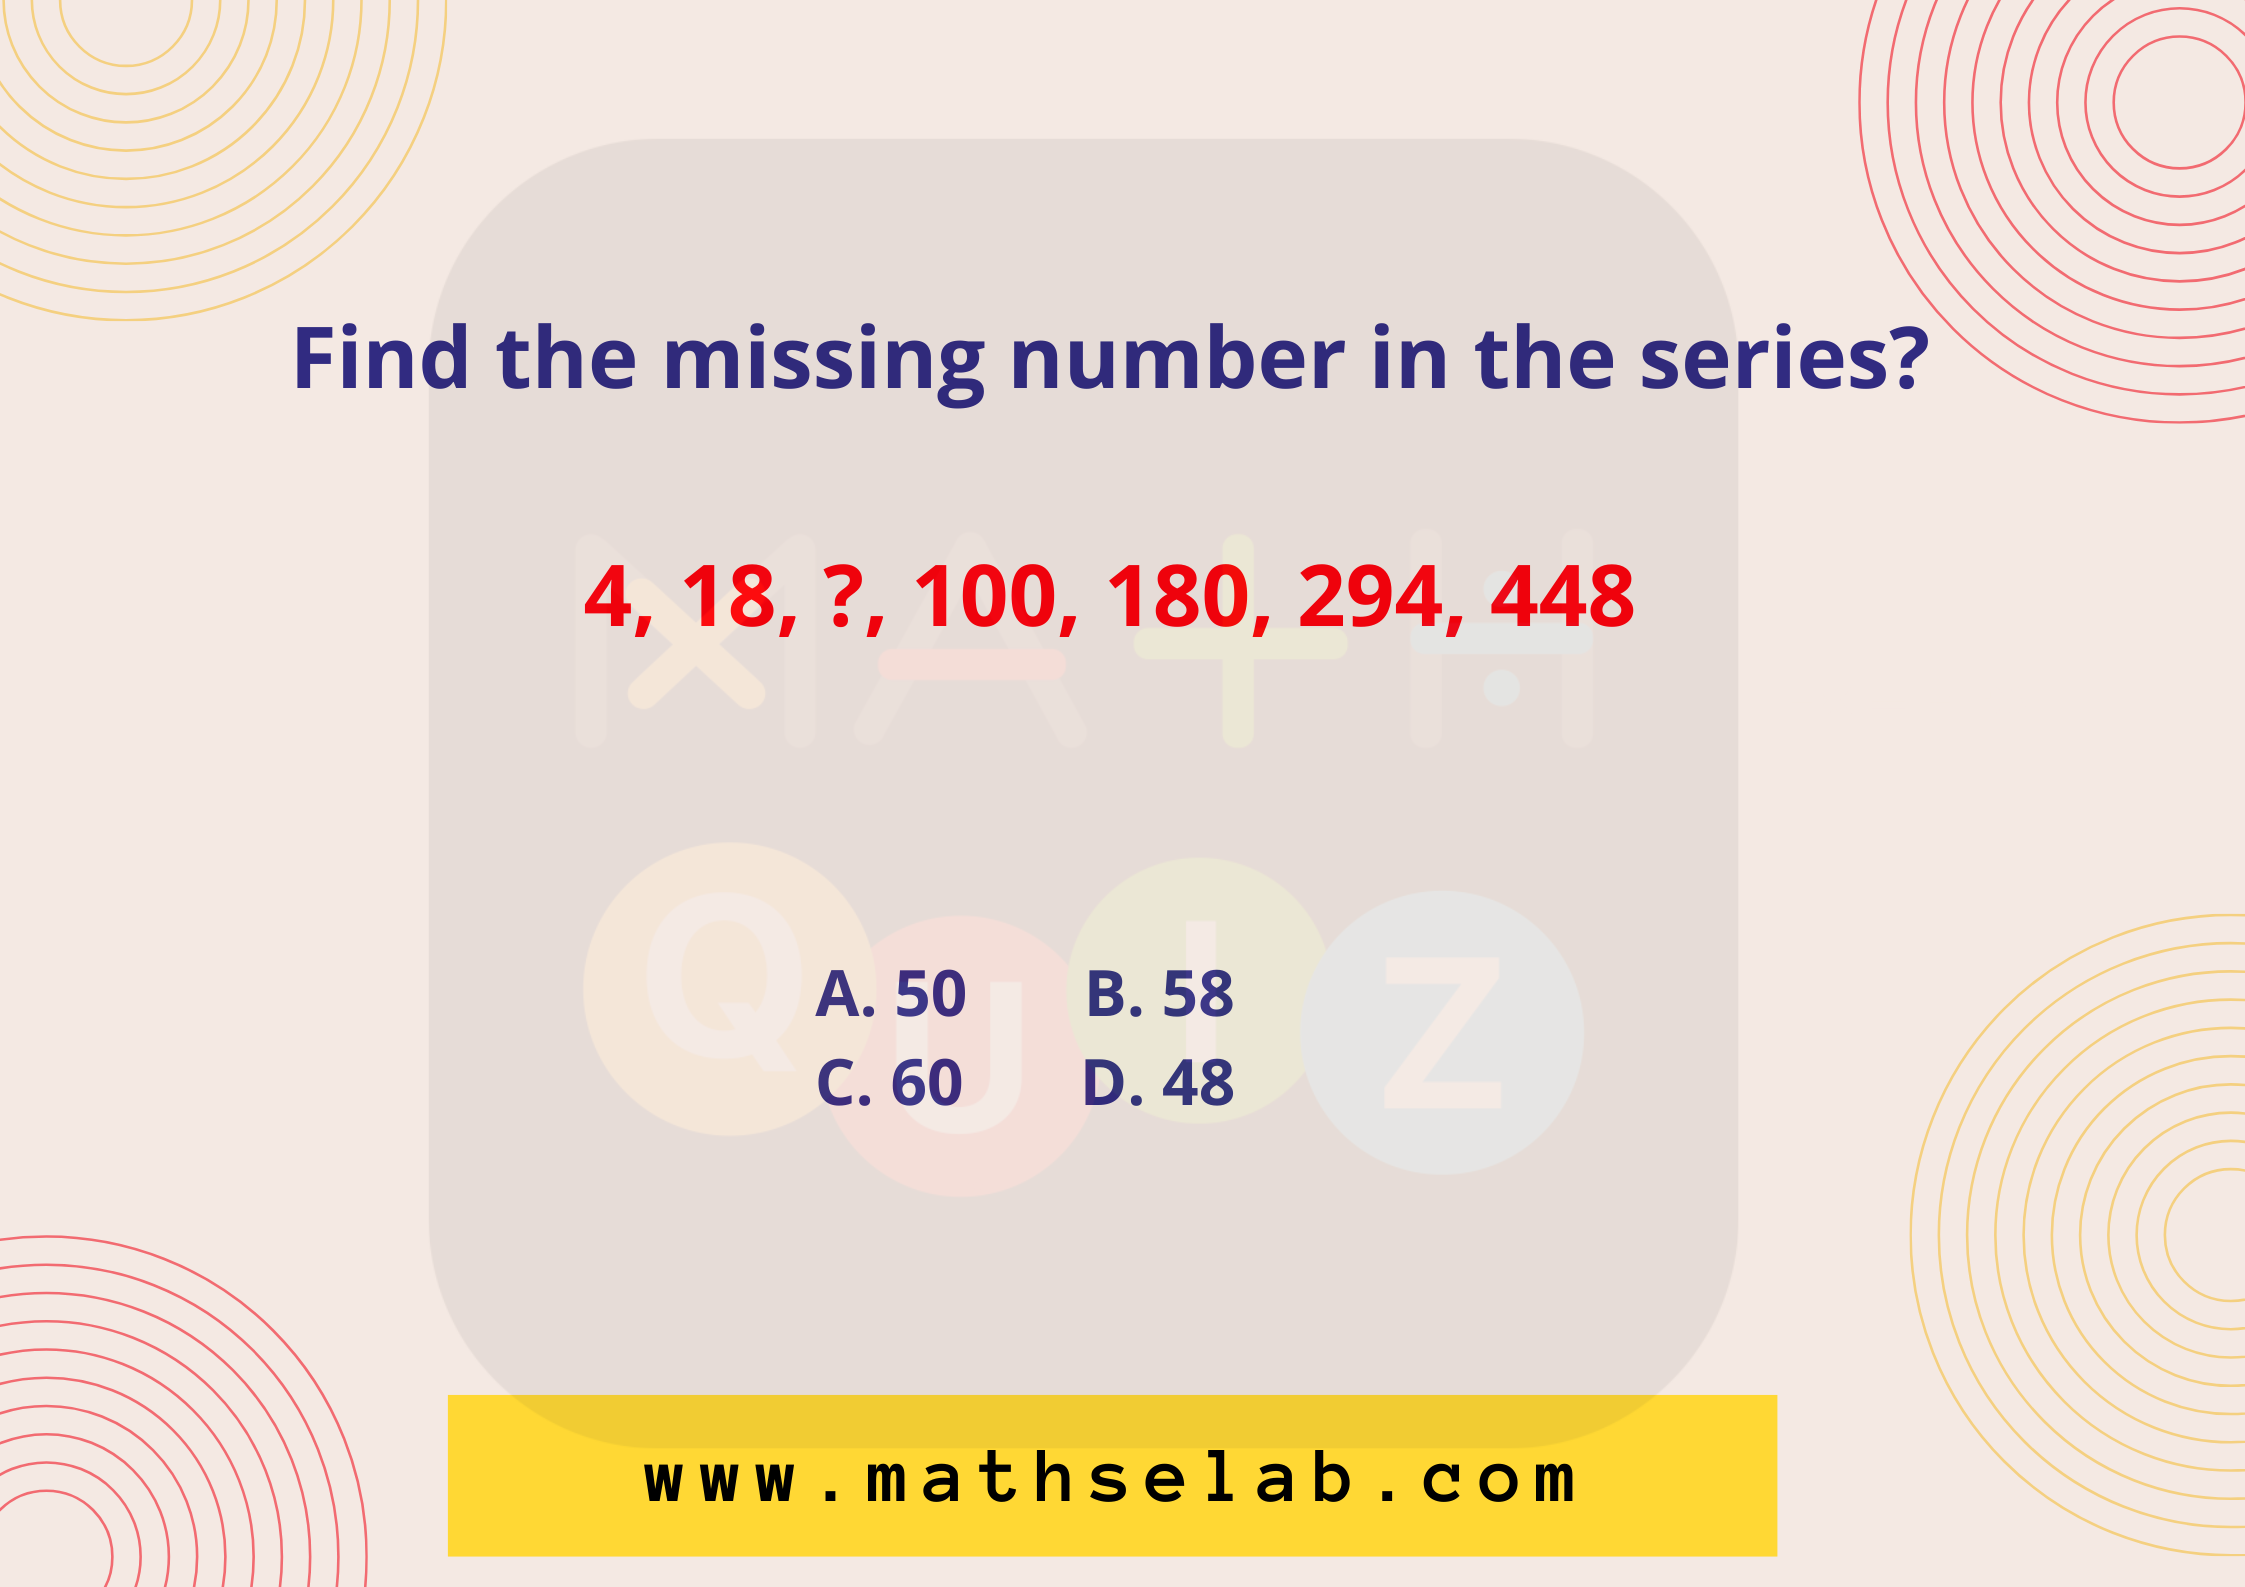 Find the missing number in the series 4, 18, , 100, 180, 294, 448 - wordscoach.com